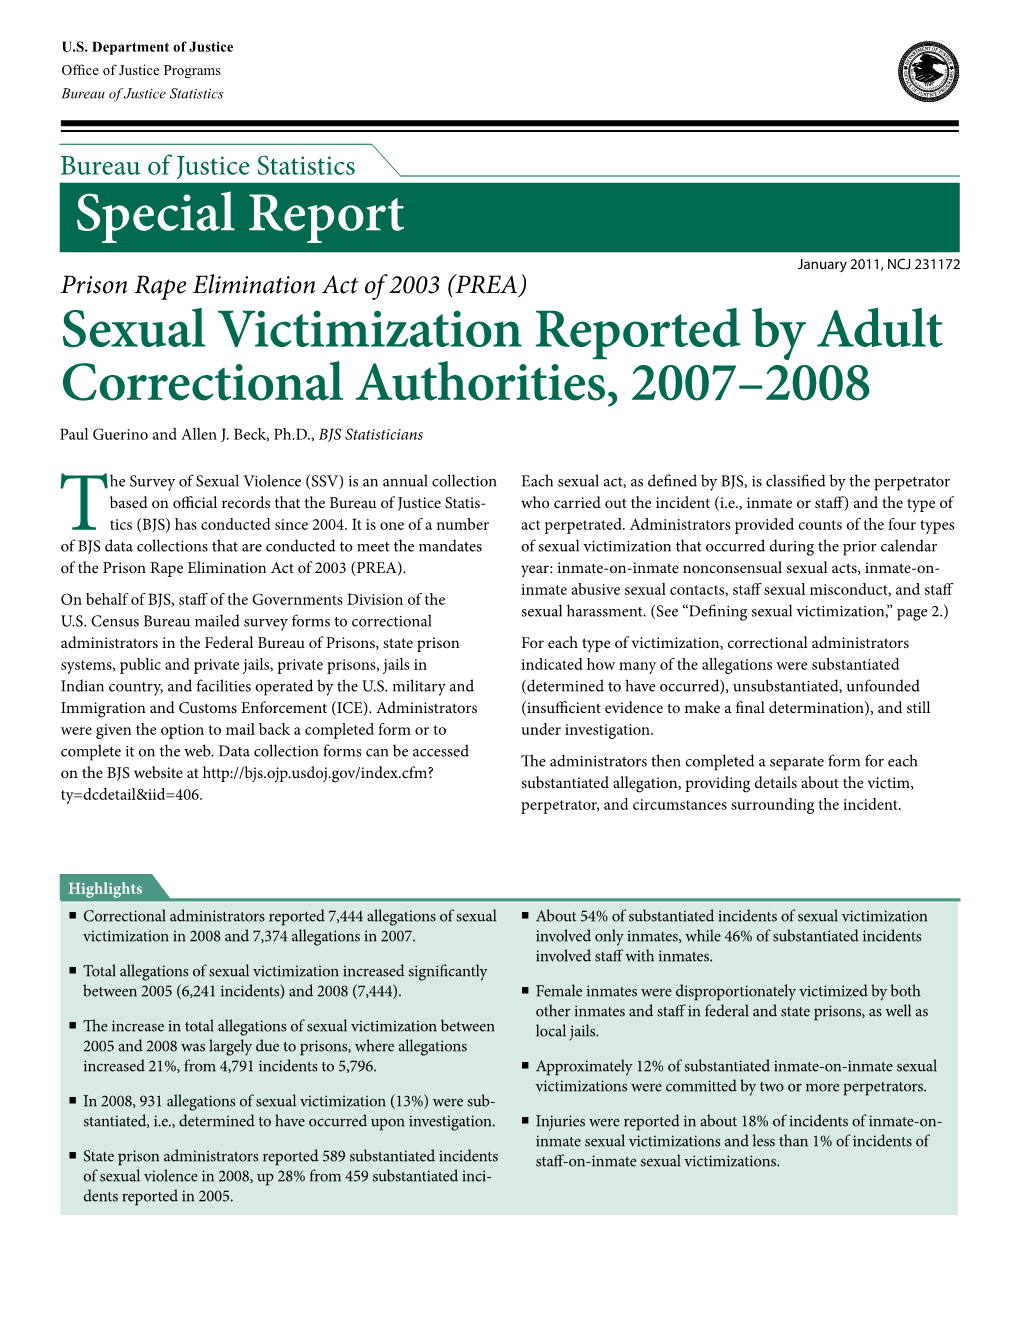 Sexual Victimization Reported by Adult Correctional Authorities, 2007–2008 Paul Guerino and Allen J